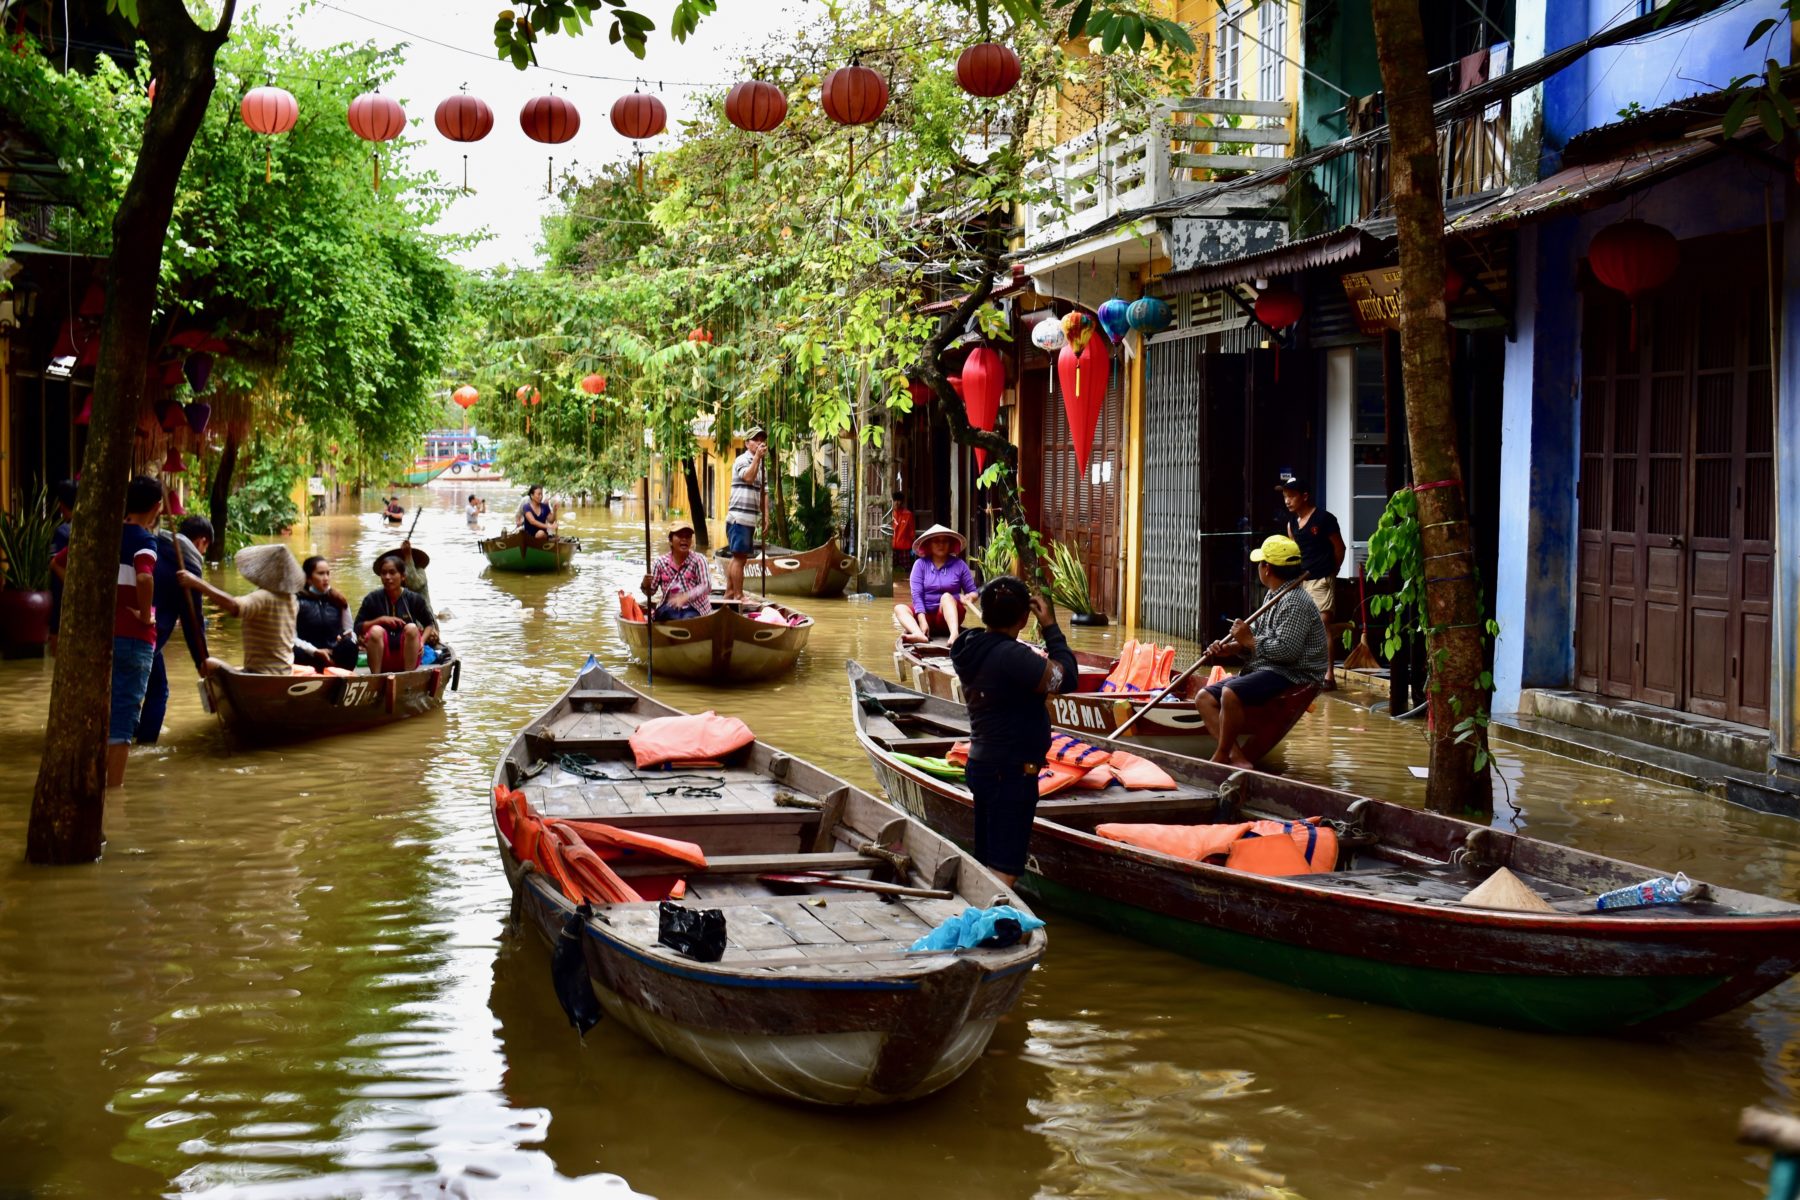 Seasonal flooding in the old city of Hoi An, Vietnam